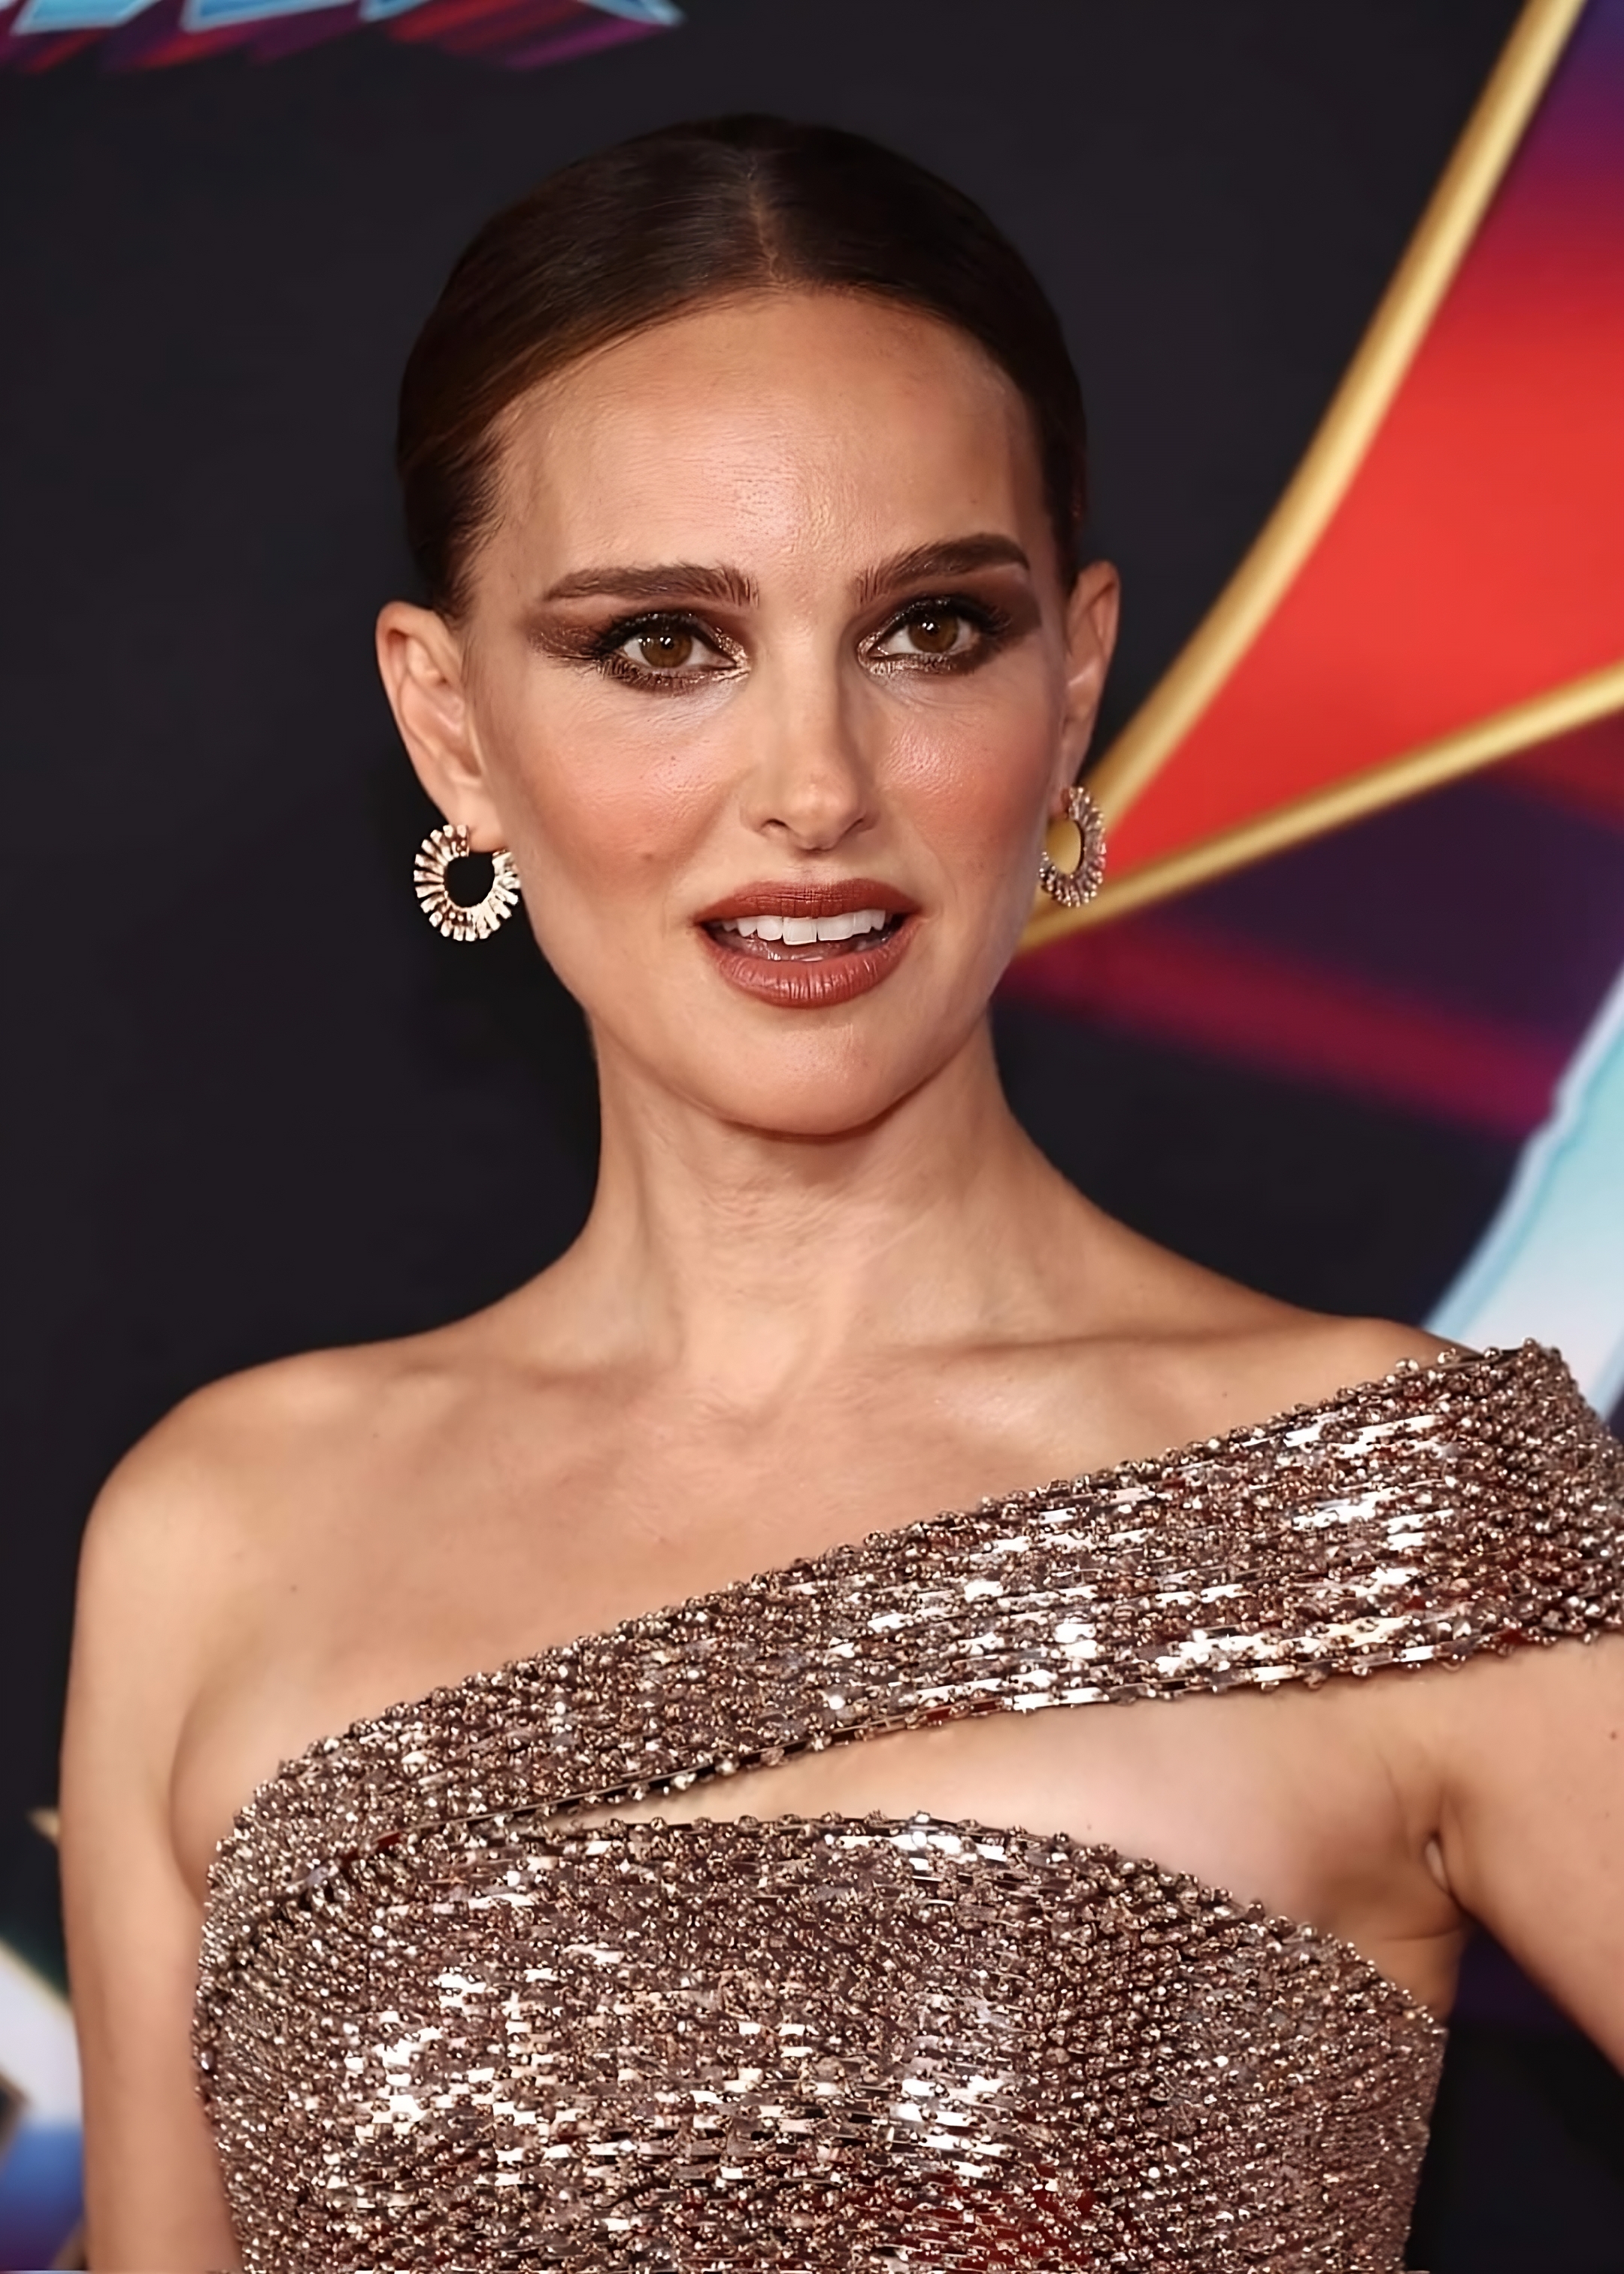 List of awards and nominations received by Natalie Portman - Wikipedia